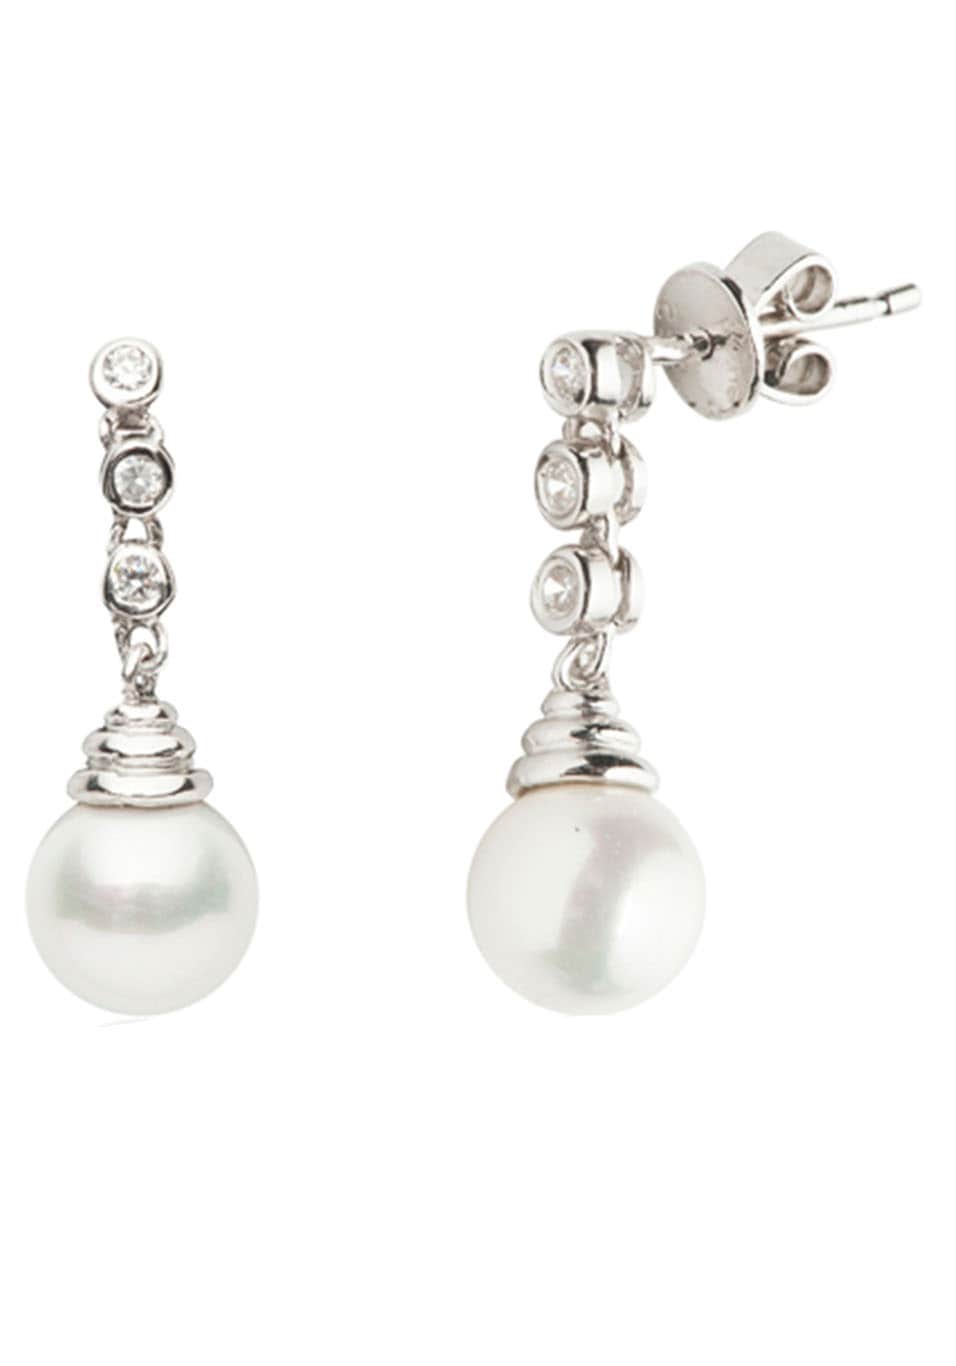 UNIKE JEWELLERY Paar Ohrstecker »CLASSY (synth.) Zirkonia UK.BR.1204.0001«, mit Perle mit online (synth.) PEARL, 